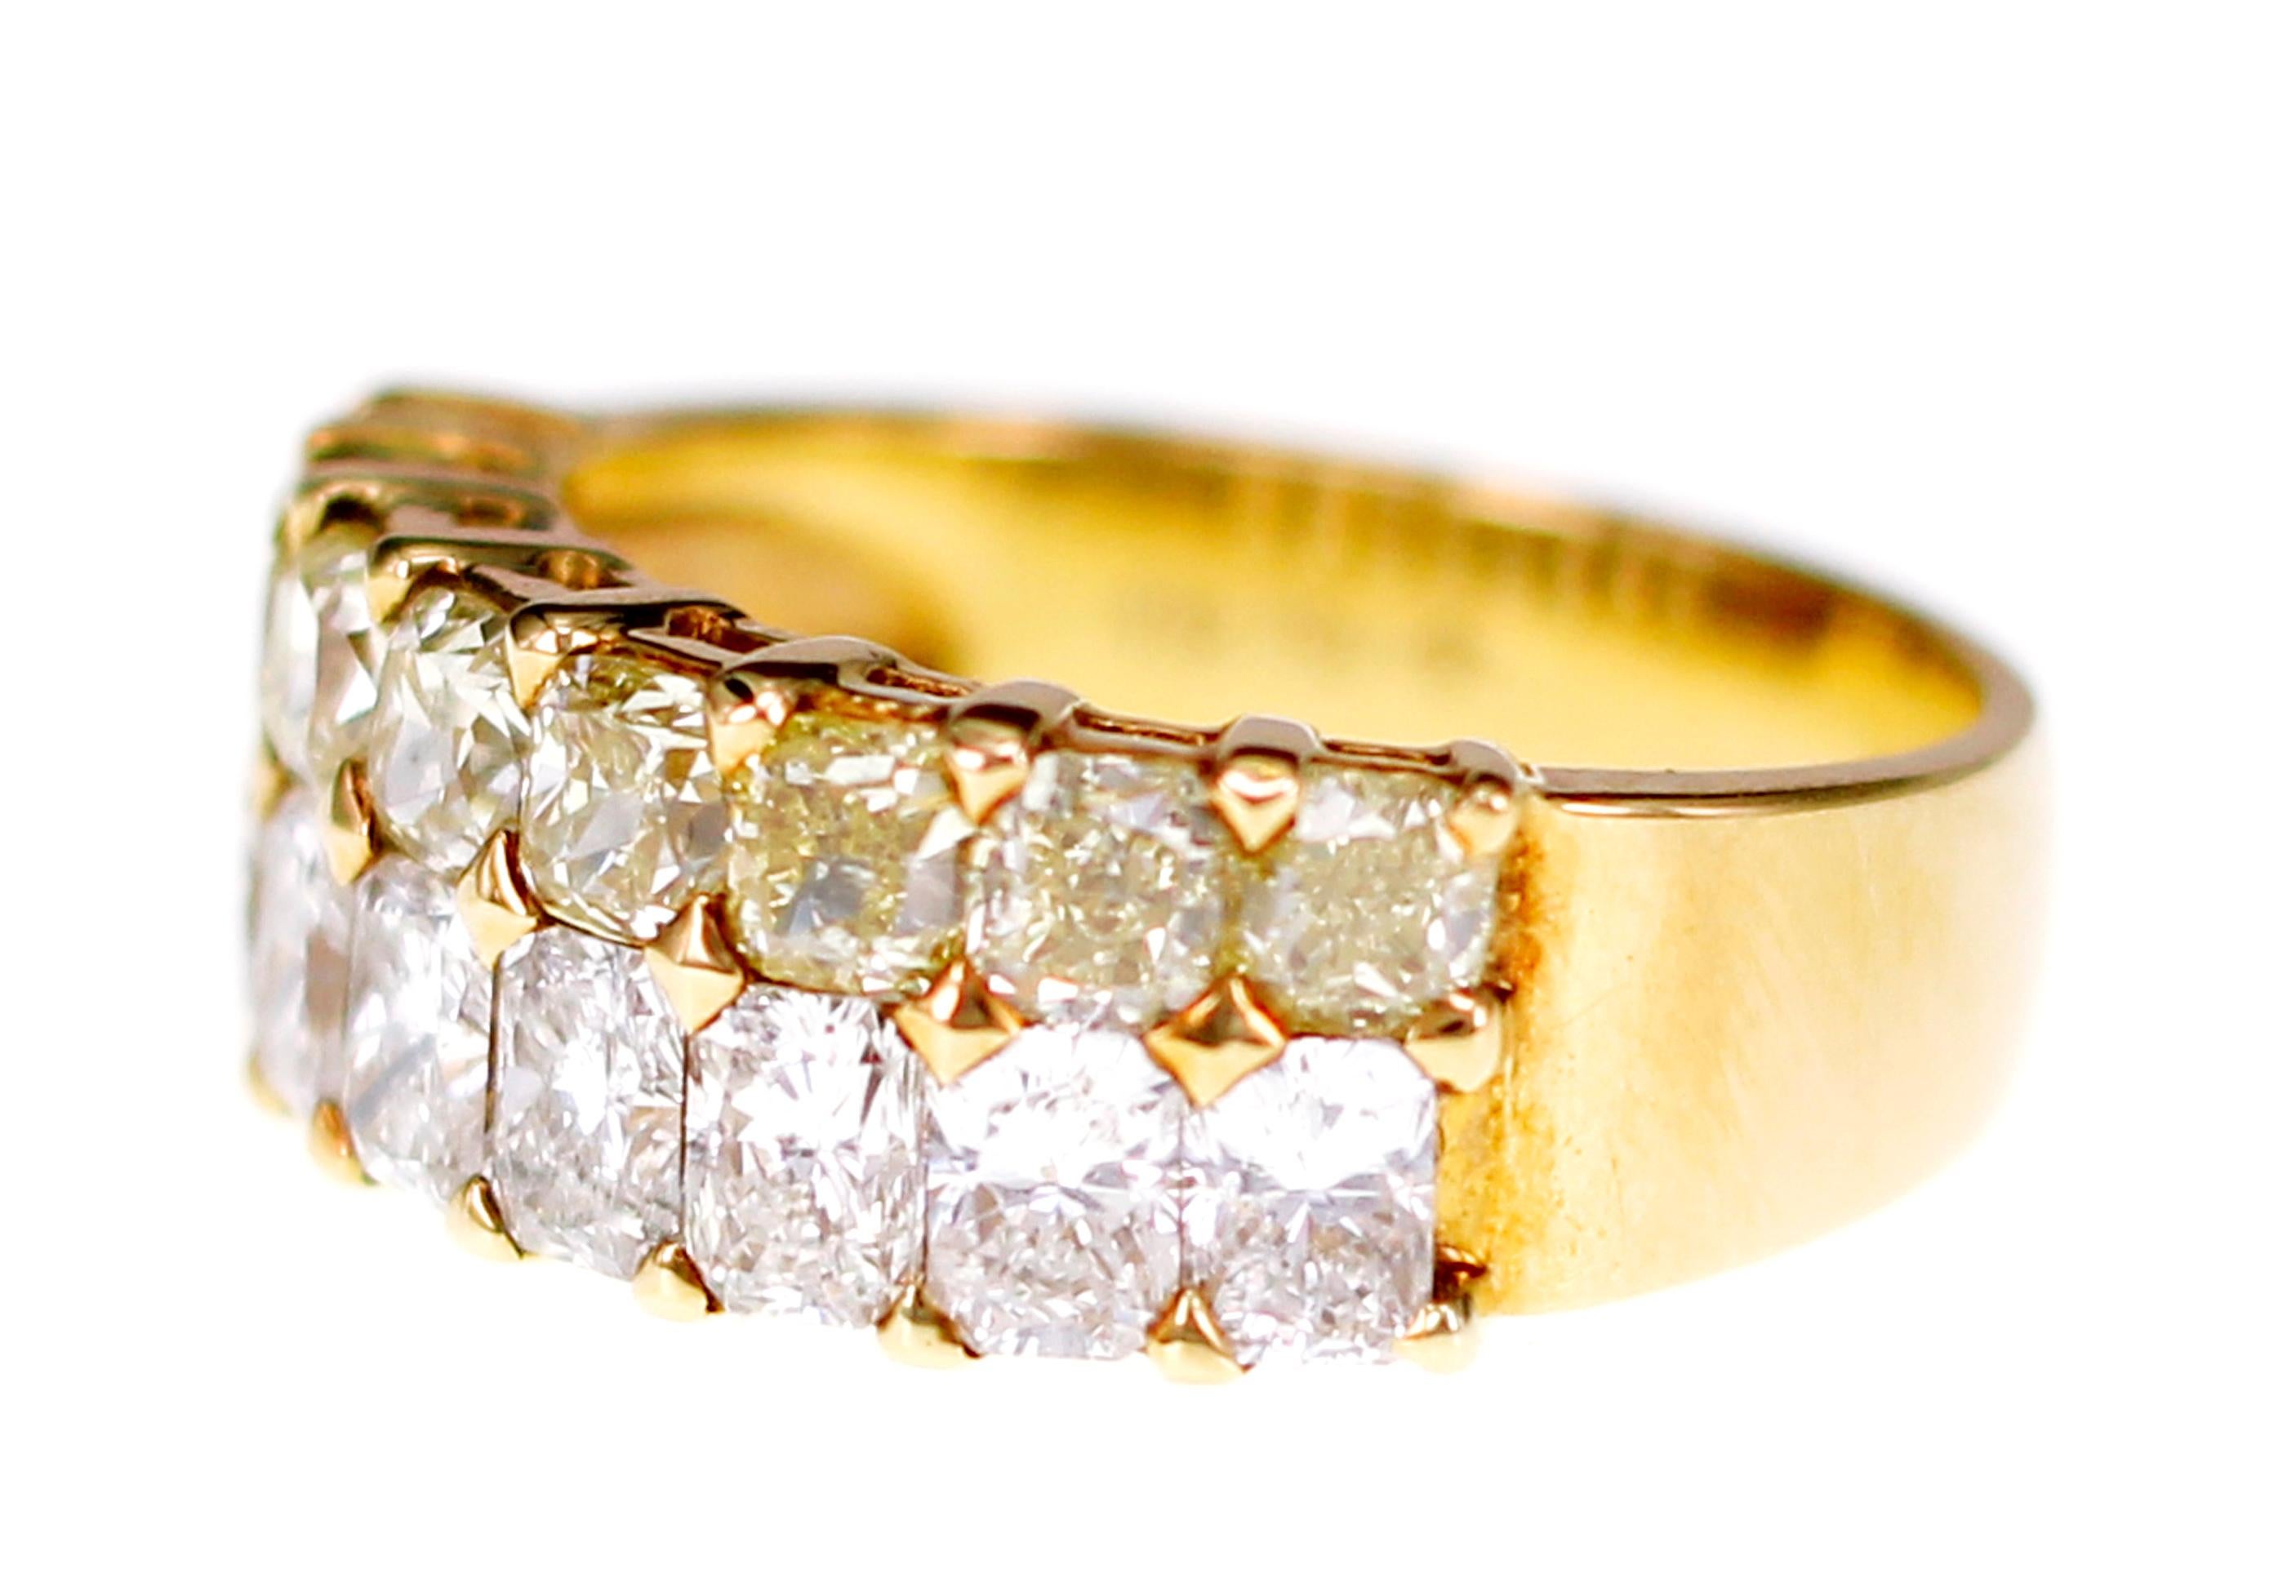 An explosive combination of natural fancy yellow diamond with natural white radiant cut brilliant diamond is set on a band ring.
Can be used for all events and has all the charms to become your favorite.